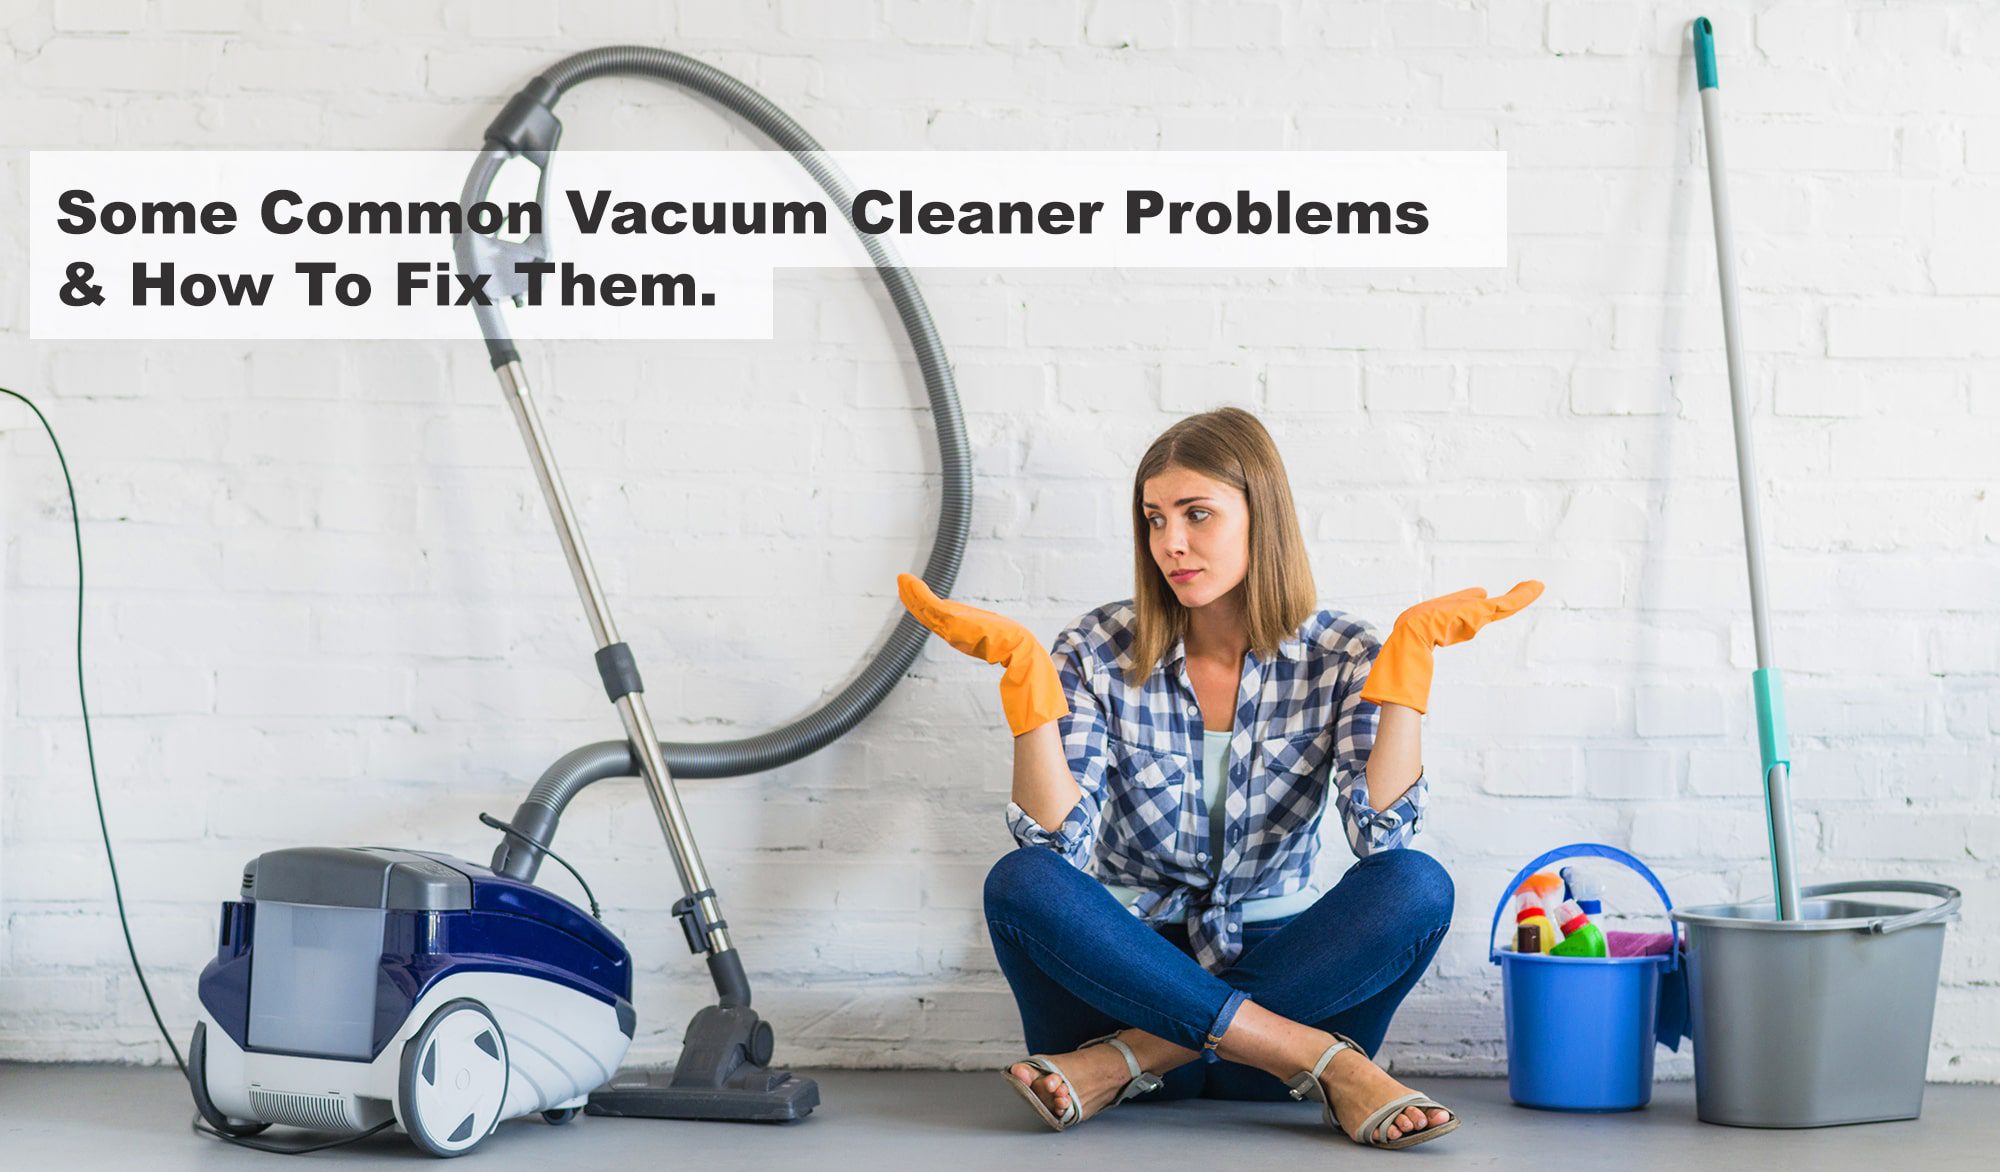 Desktop Vacuum Cleaner: What are the common problems?